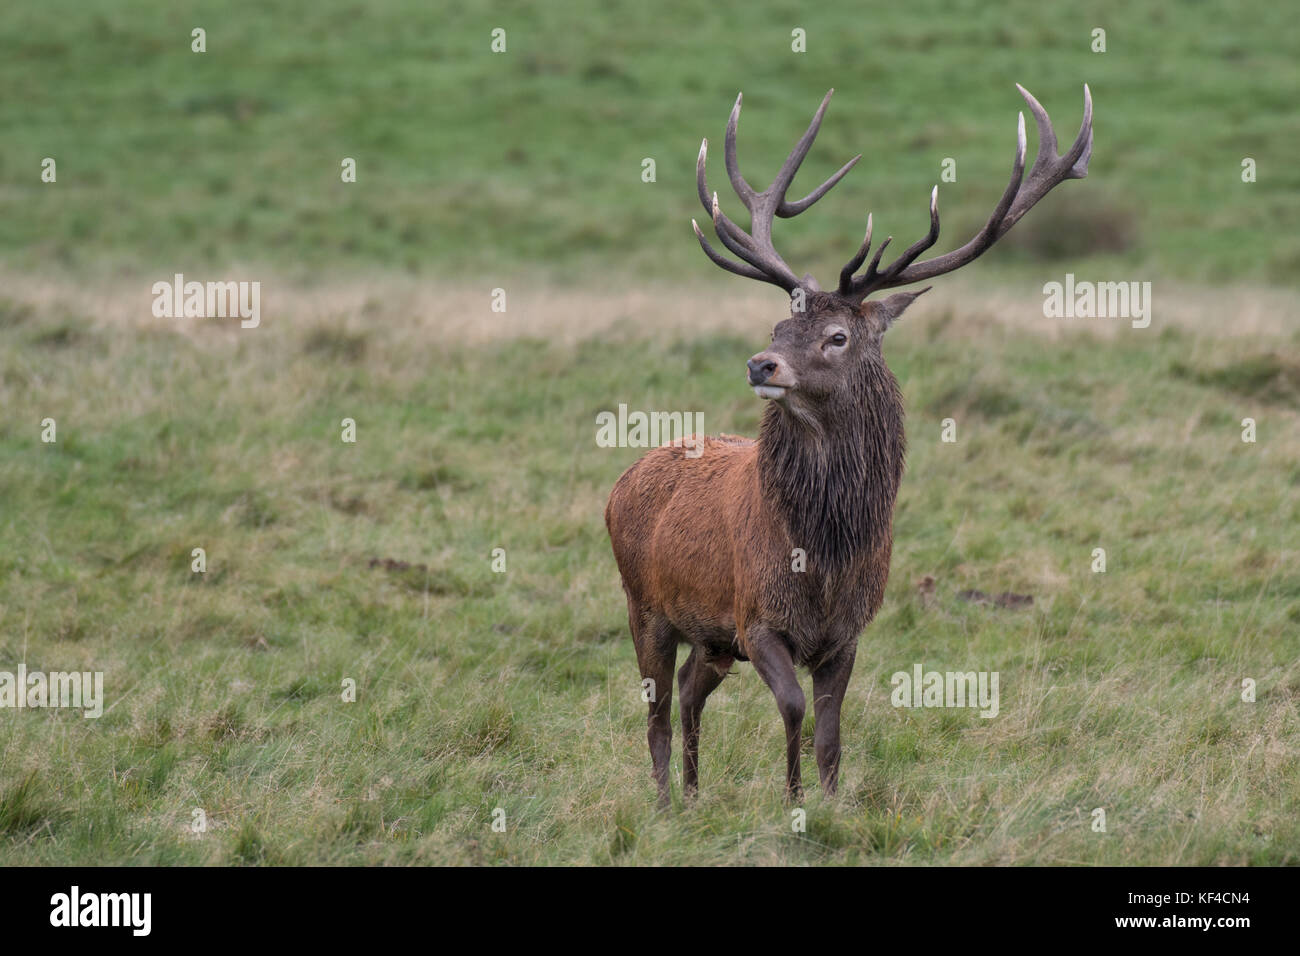 A solitary single red deer stag standing proud in grassland and looking to the left. Full length portrait showing antlers and an intense stare Stock Photo